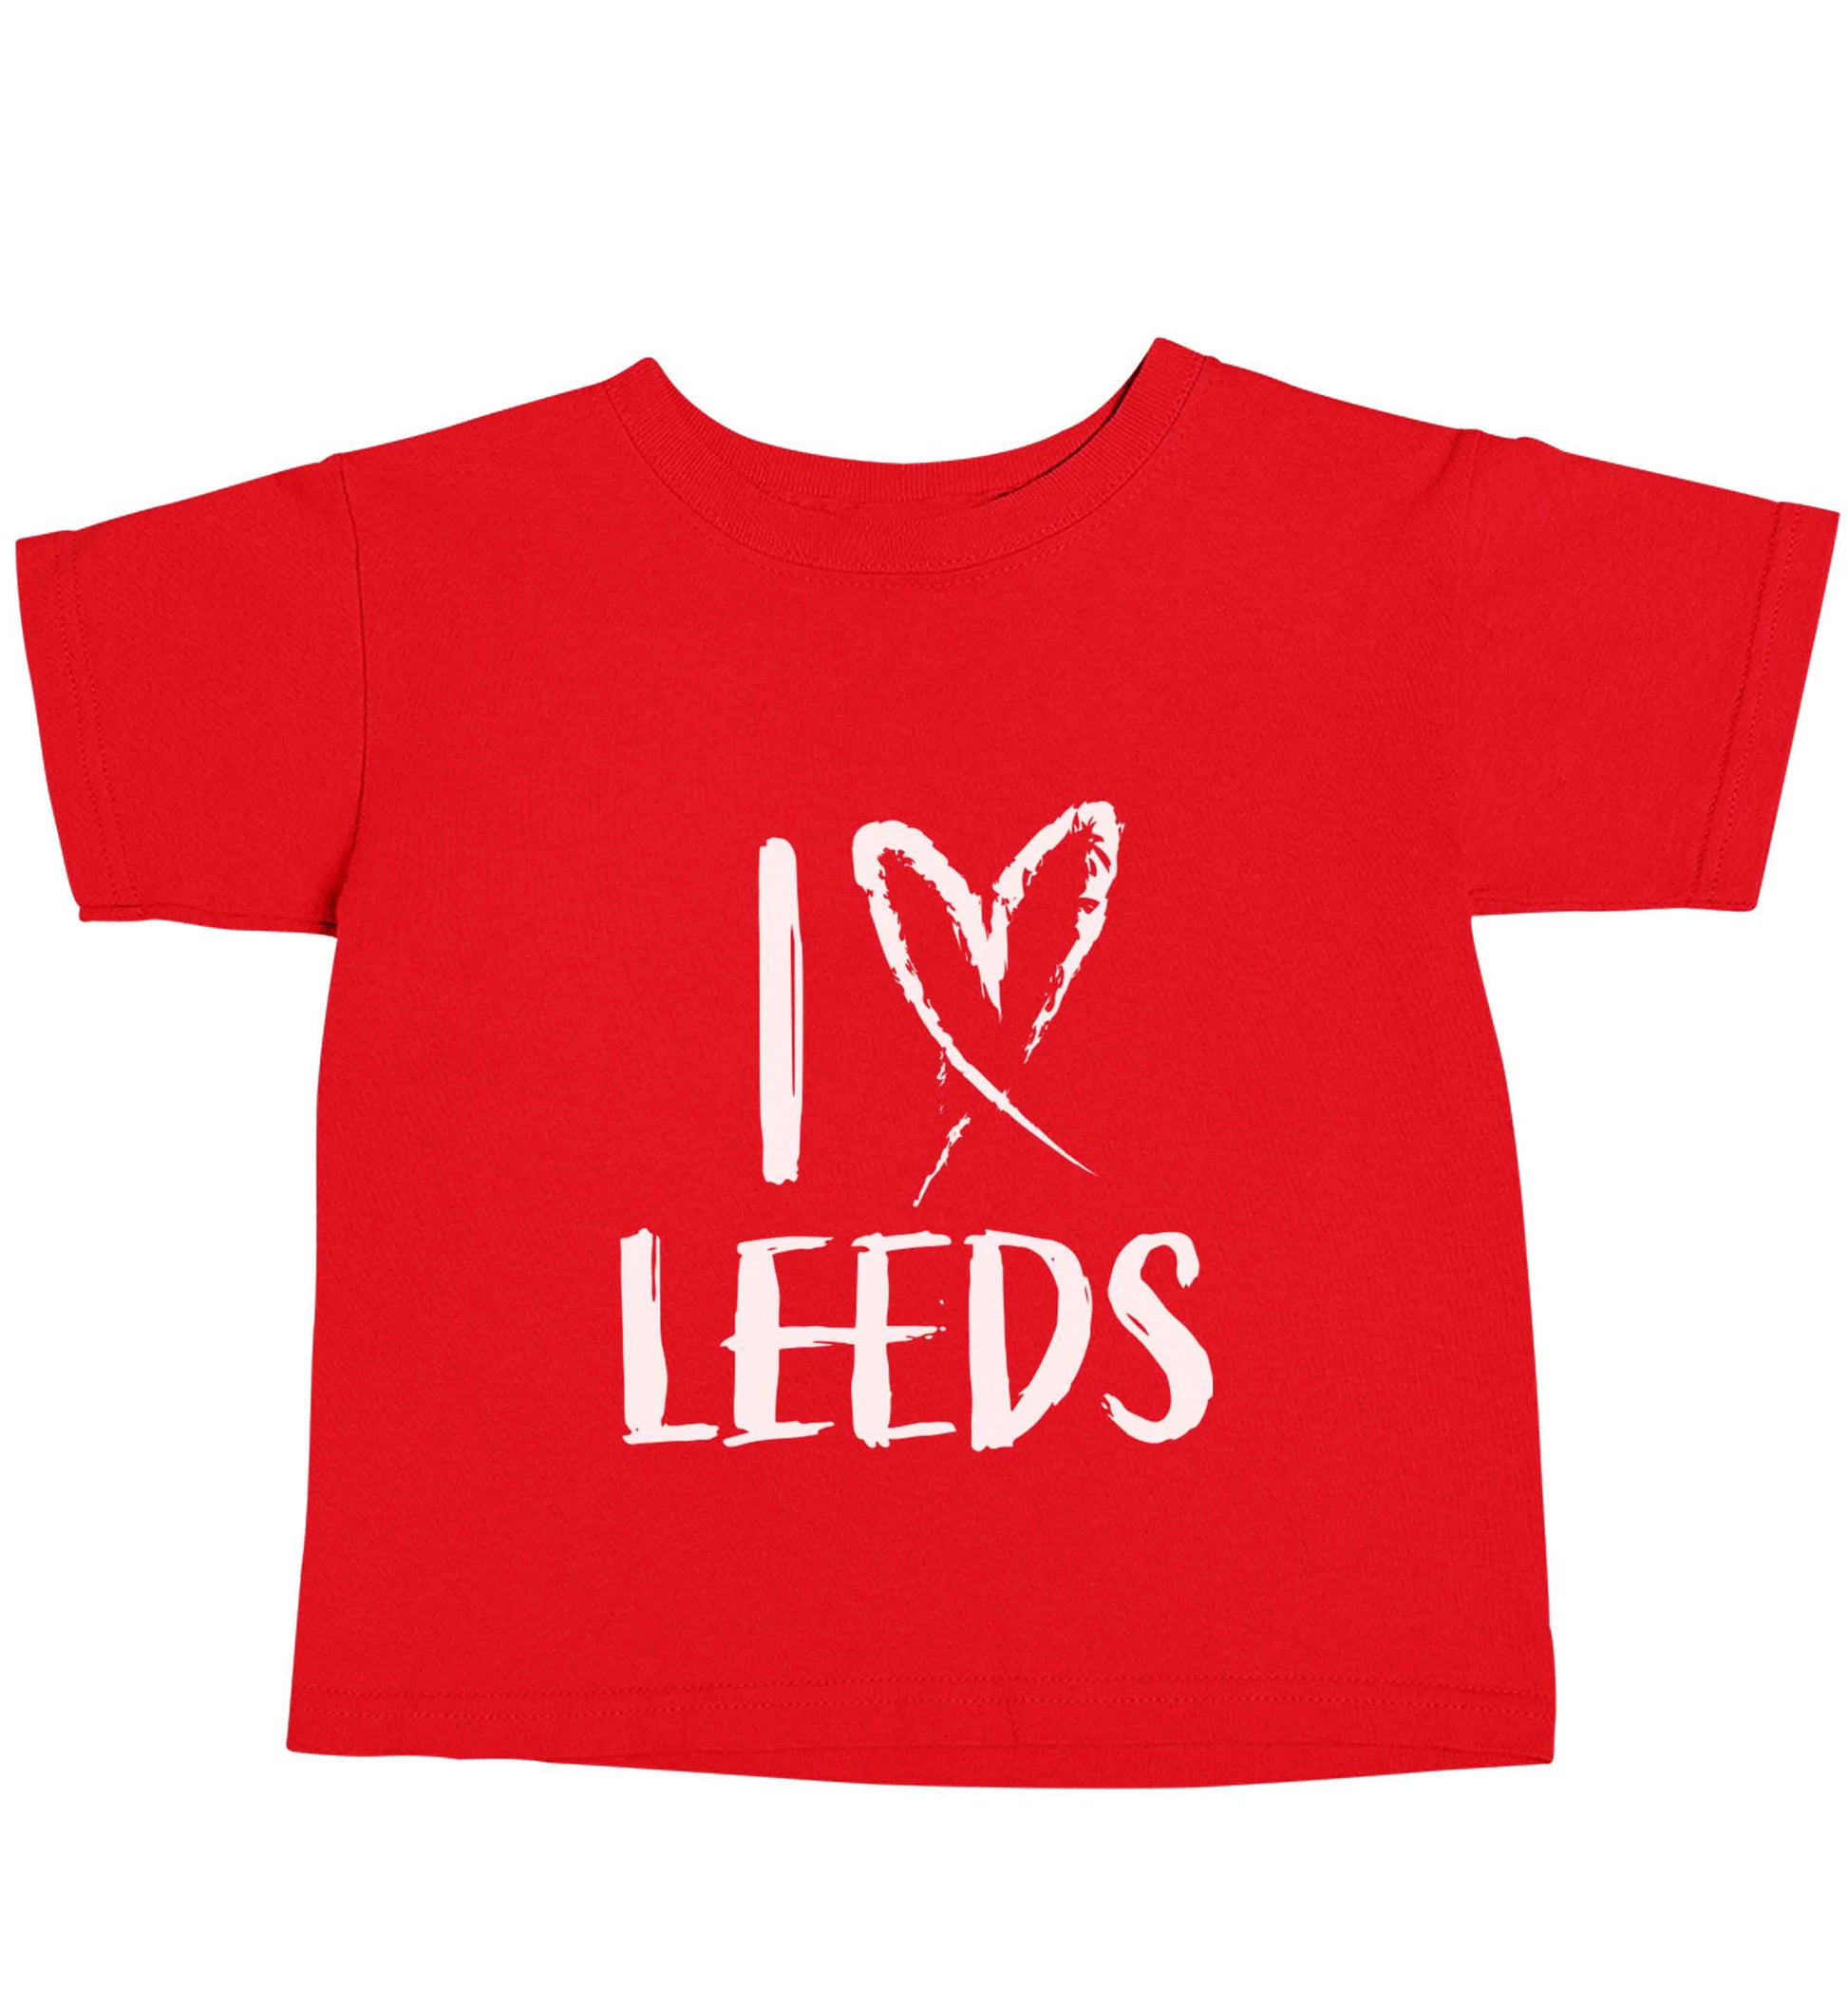 I love Leeds red baby toddler Tshirt 2 Years